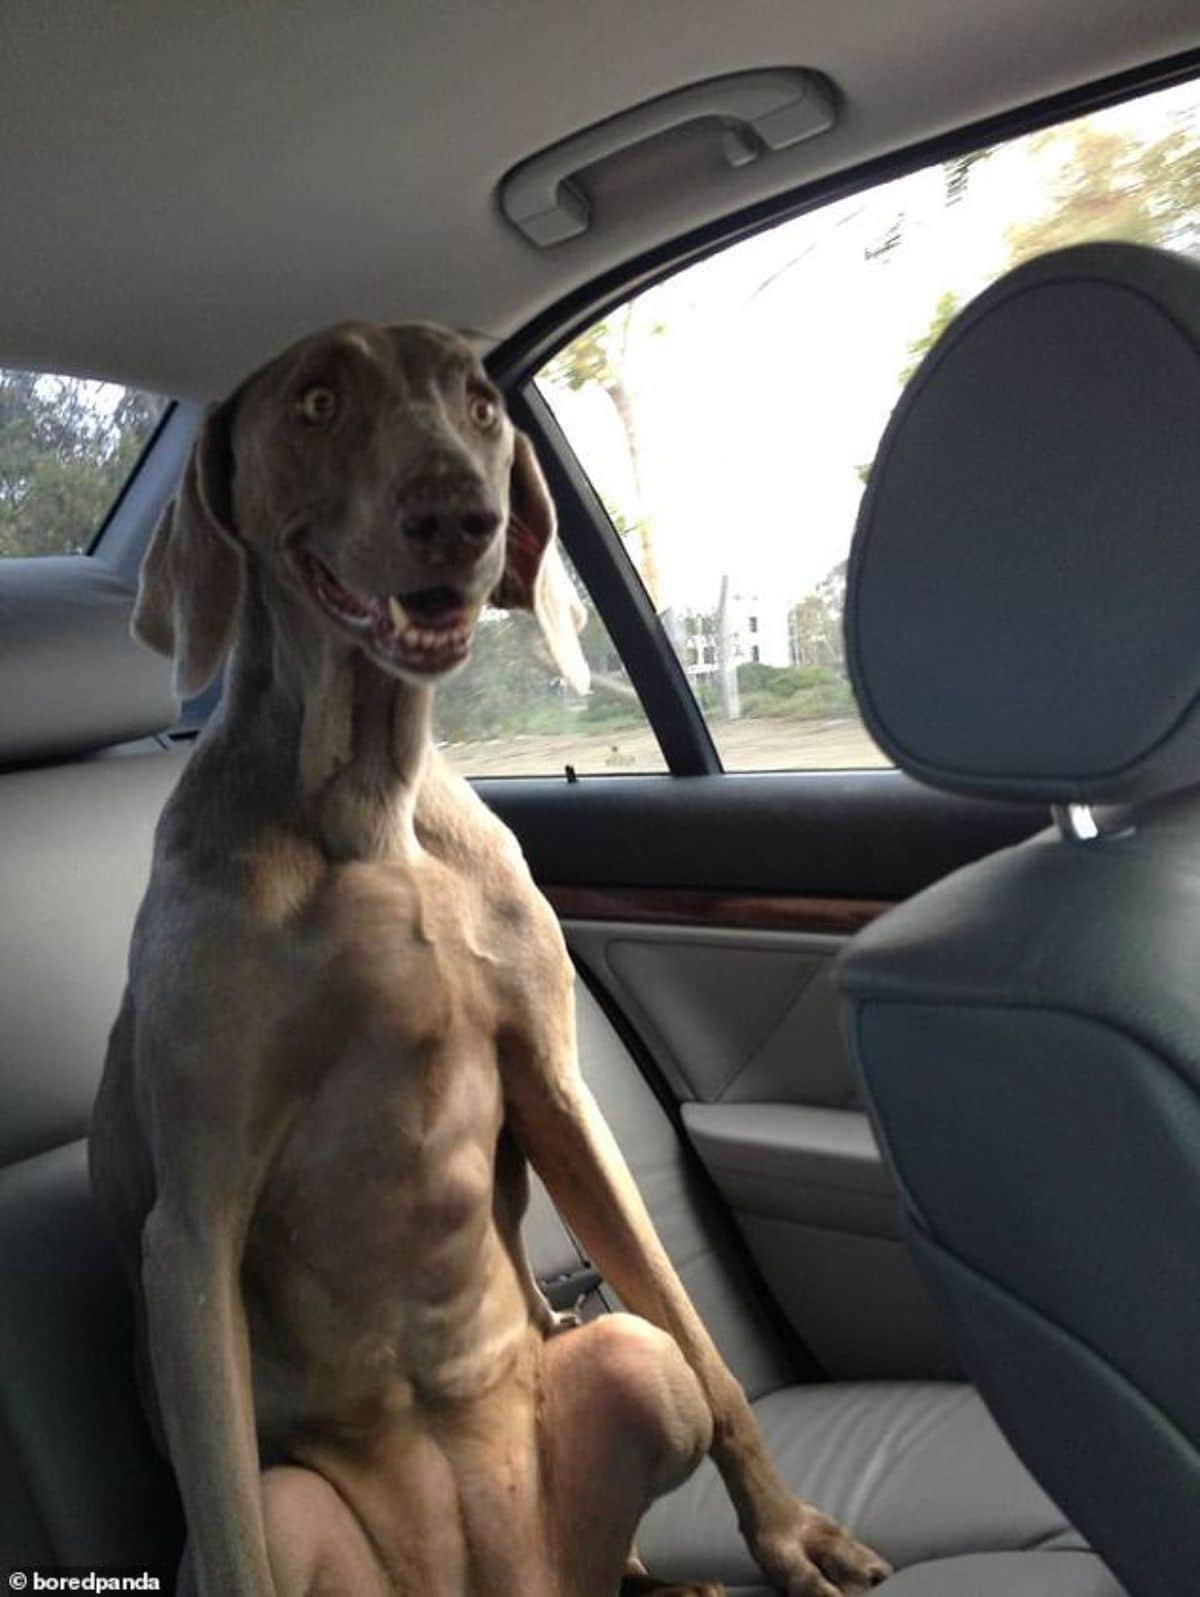 grey weimaraner sitting on its haunches in the backseat of a car